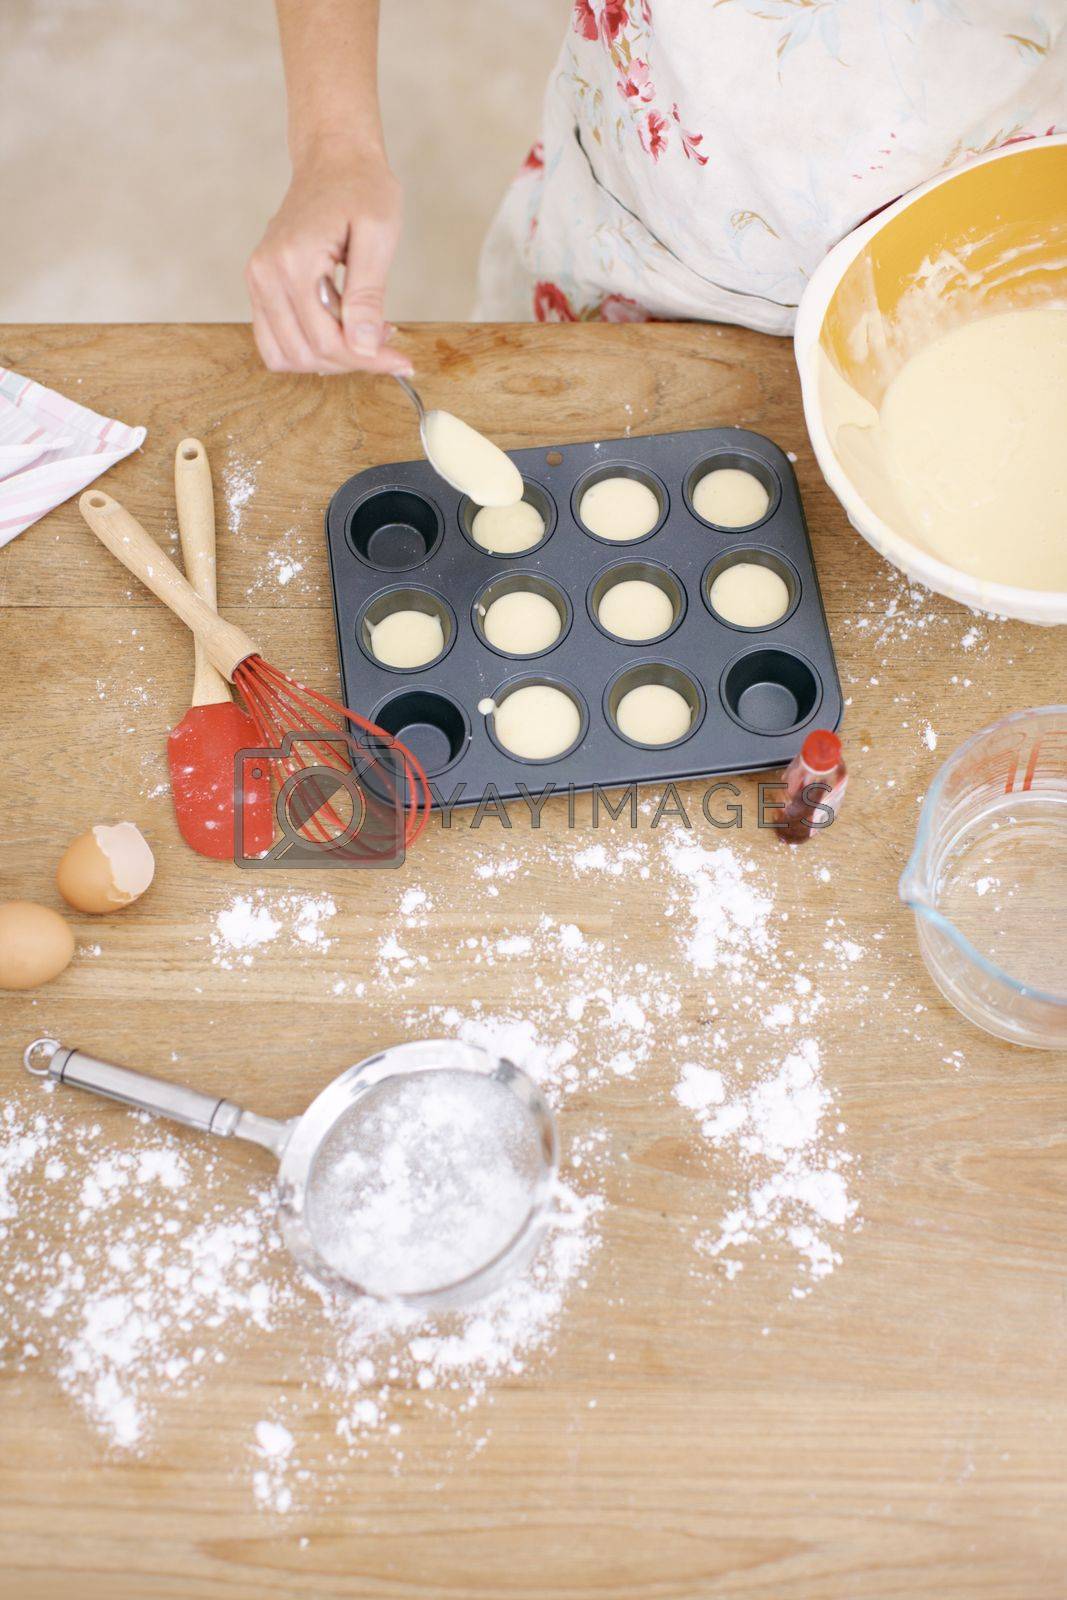 Royalty free image of Filling the baking tray. A woman placing cake mix into a baking tray. by YuriArcurs